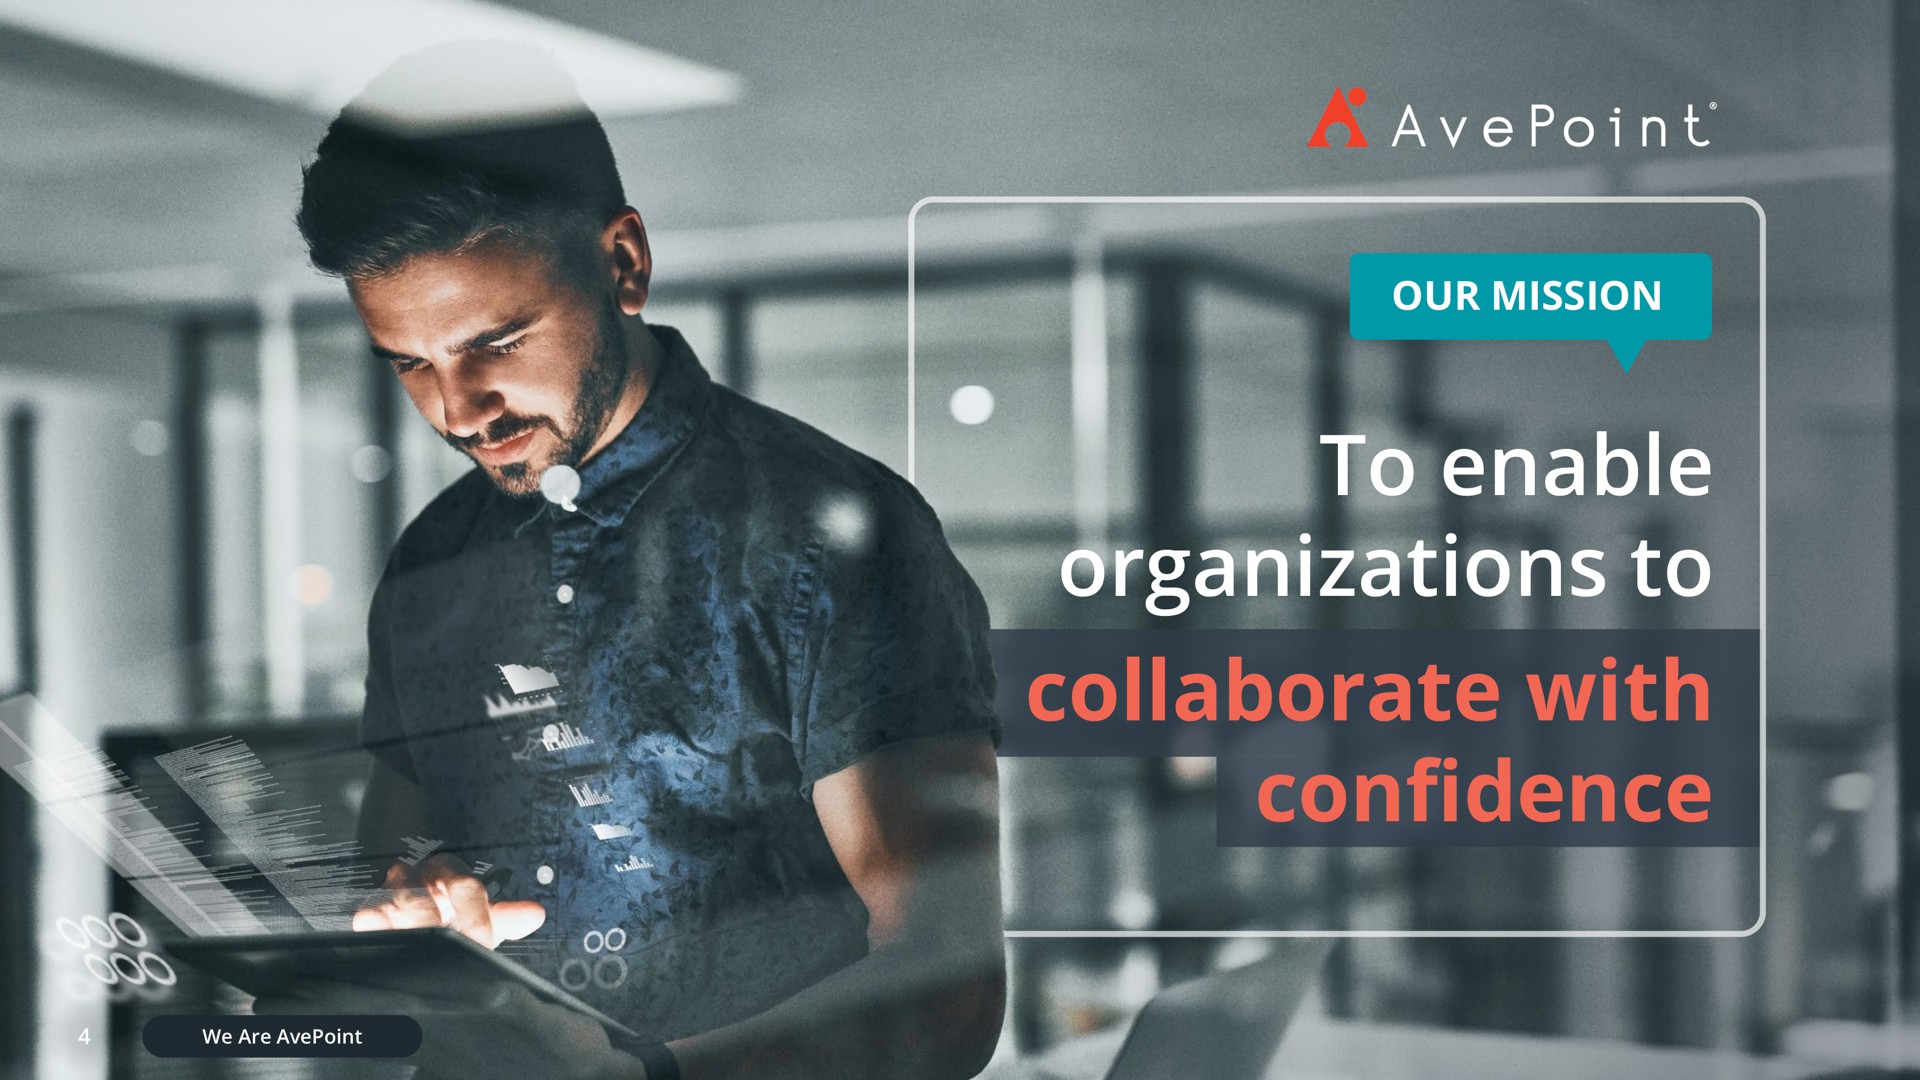 our mission to enable organizations to collaborate with confidence cote aes ate | AvePoint